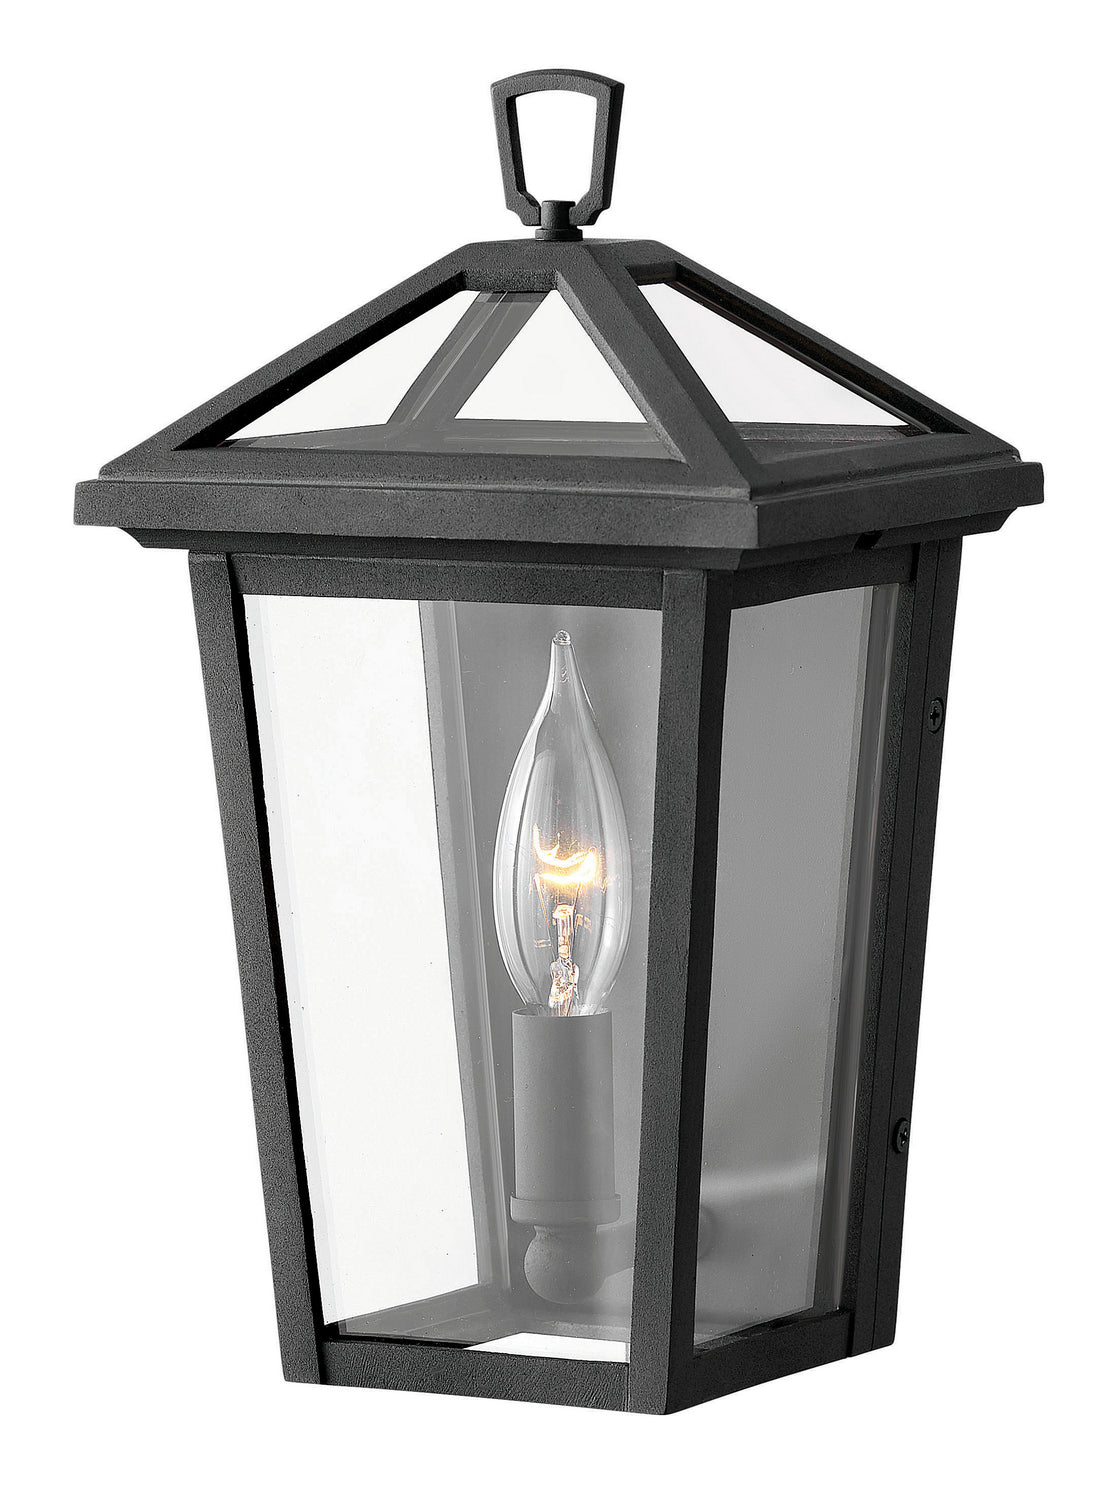 Hinkley - 2566MB - LED Outdoor Lantern - Alford Place - Museum Black